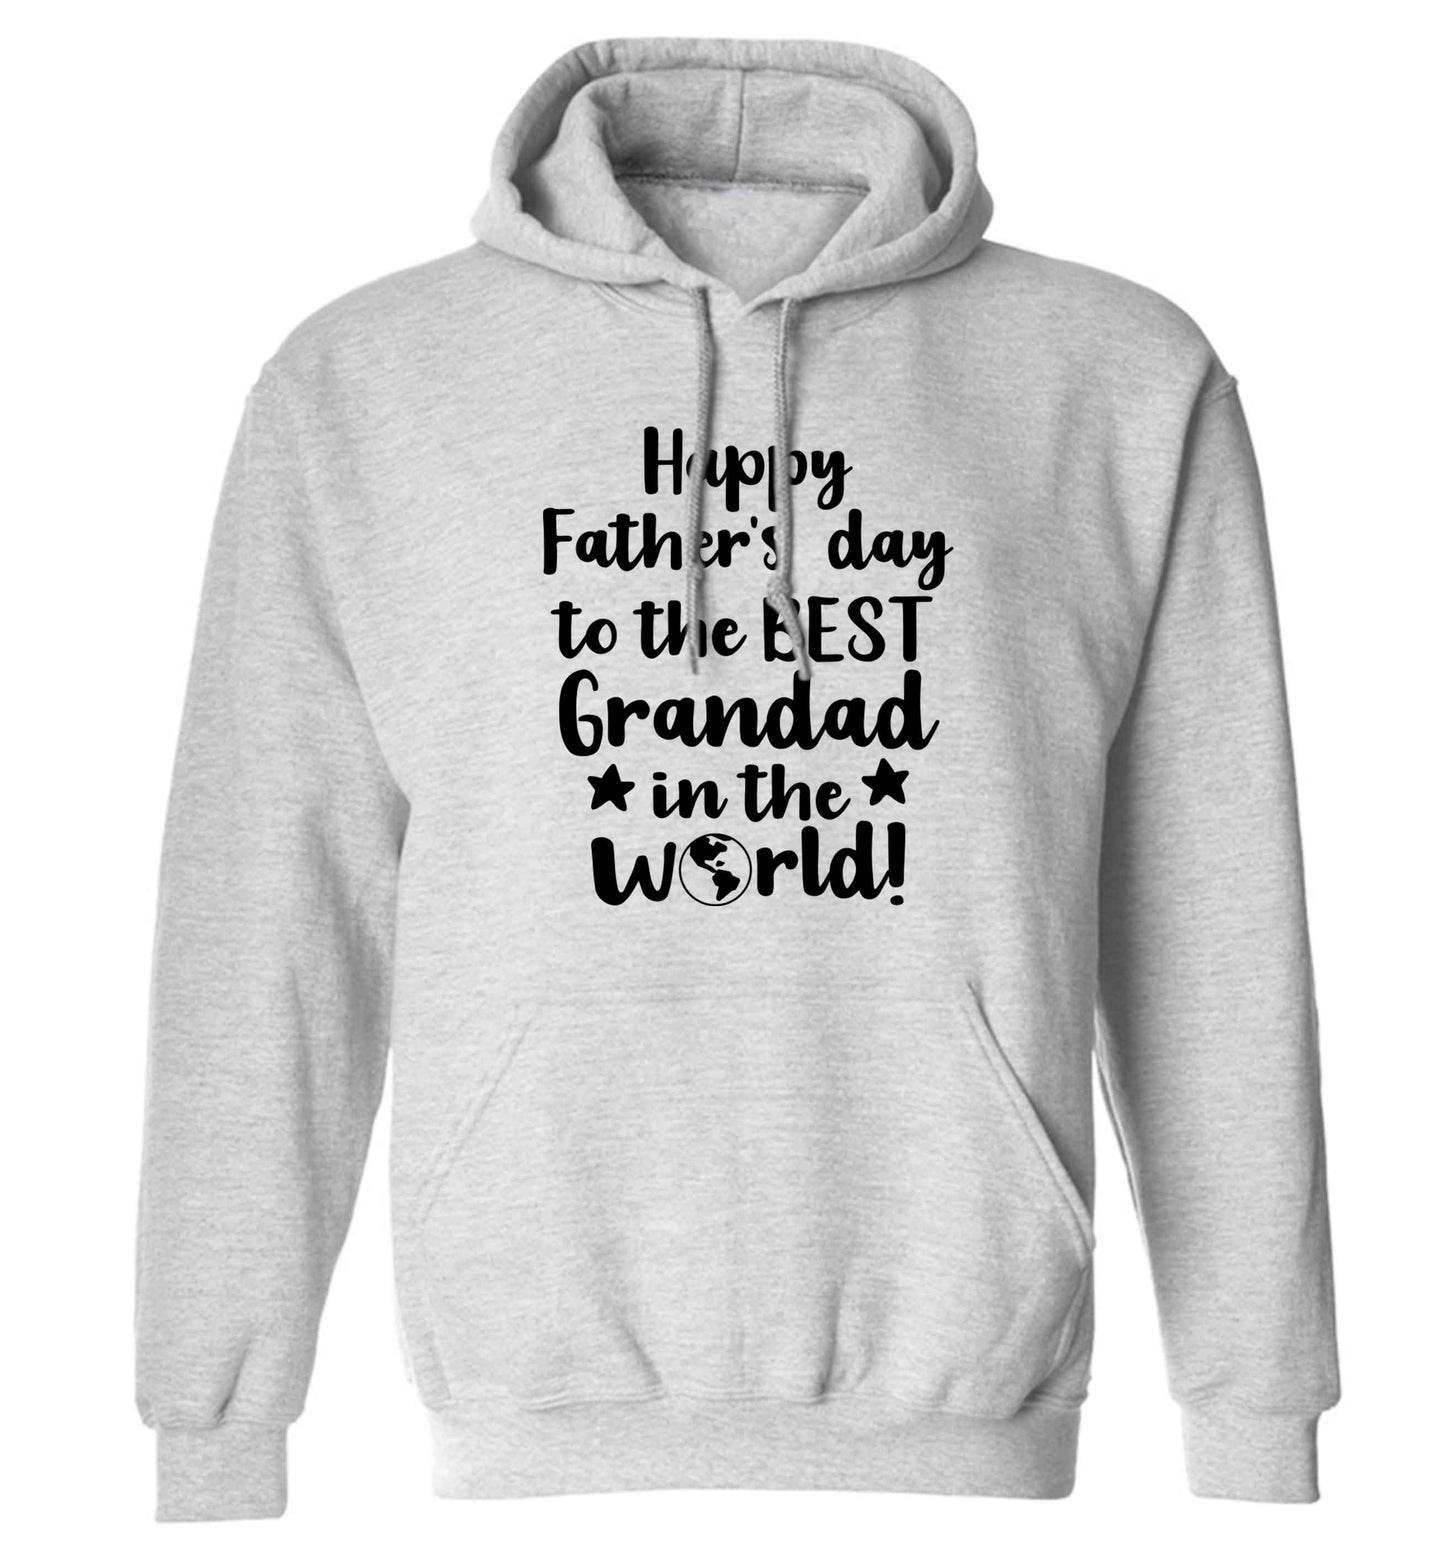 Happy Father's day to the best grandad in the world adults unisex grey hoodie 2XL